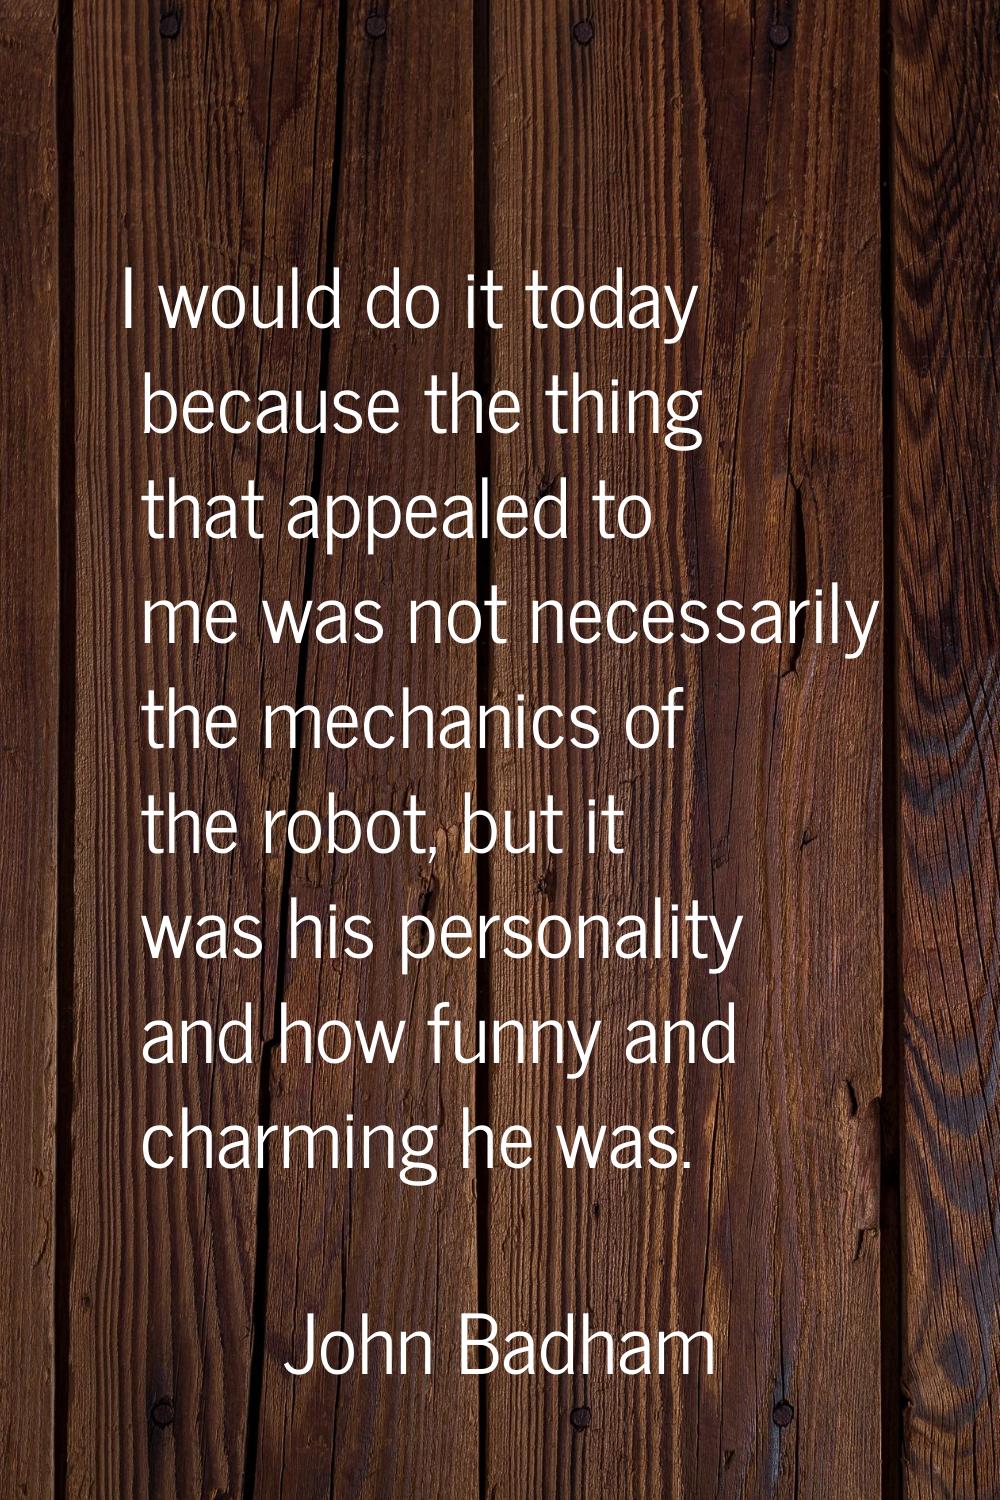 I would do it today because the thing that appealed to me was not necessarily the mechanics of the 